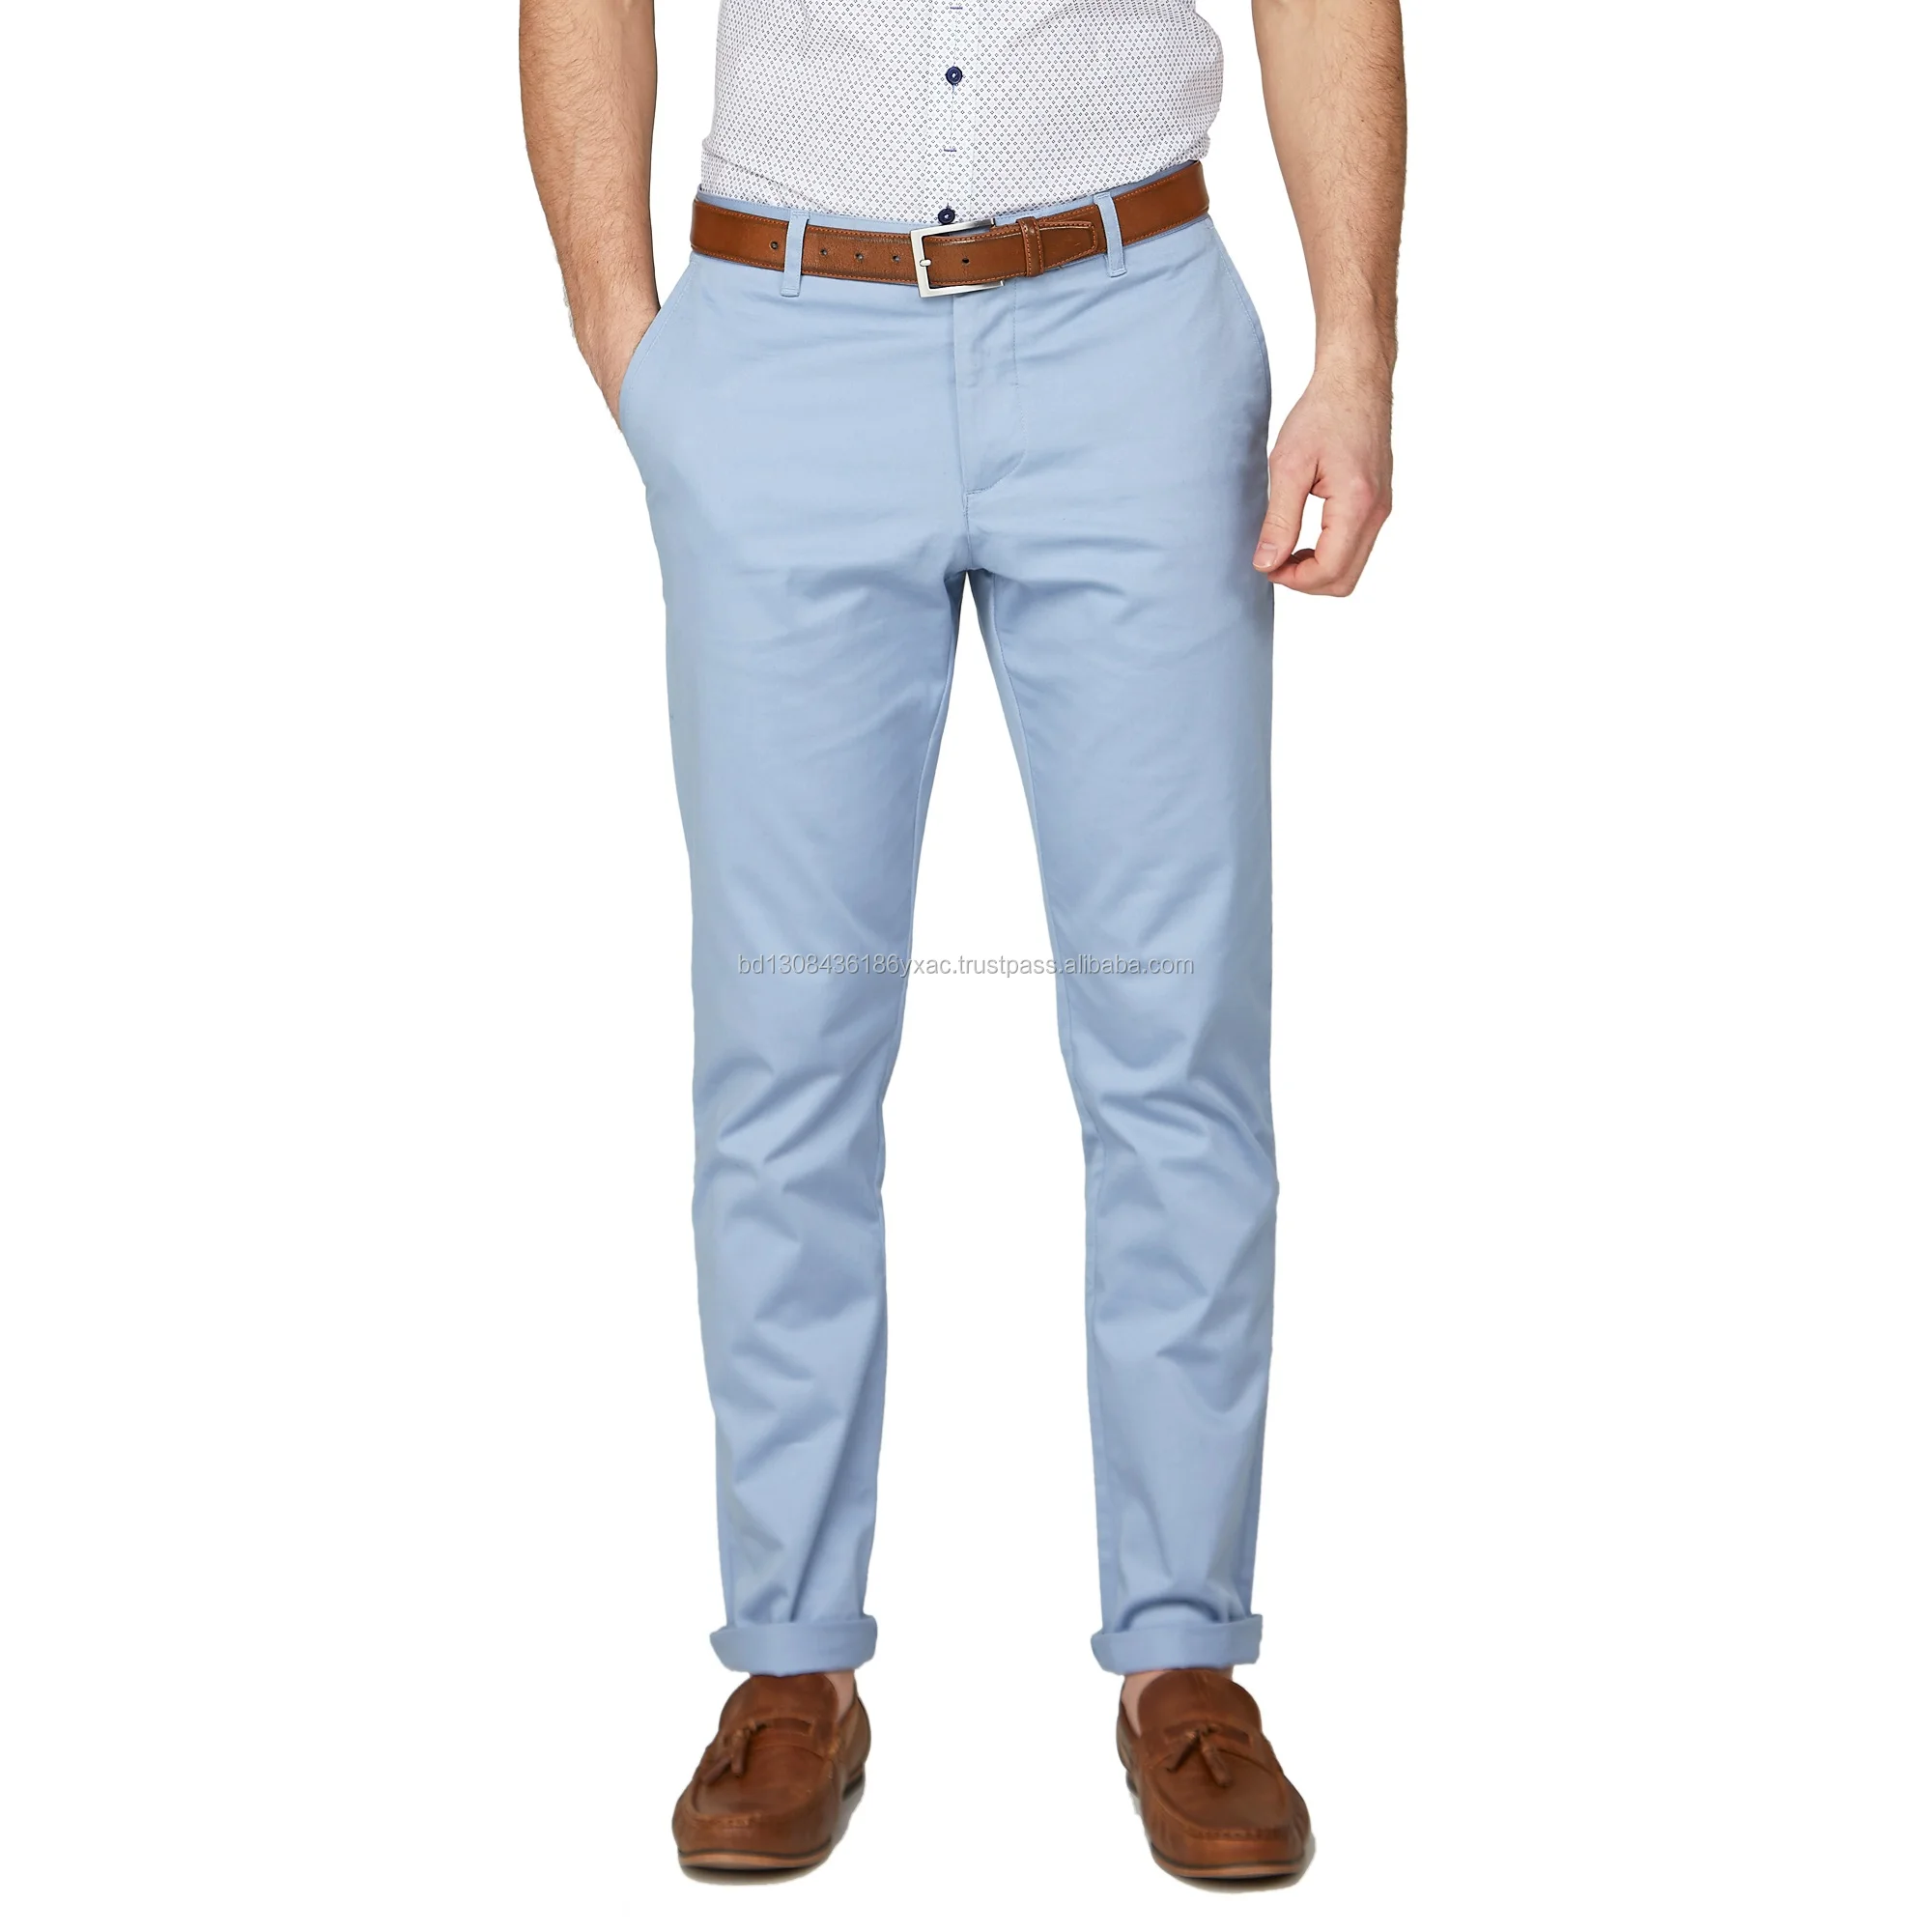 Men's Pants, Chinos & Cargos | Just Jeans